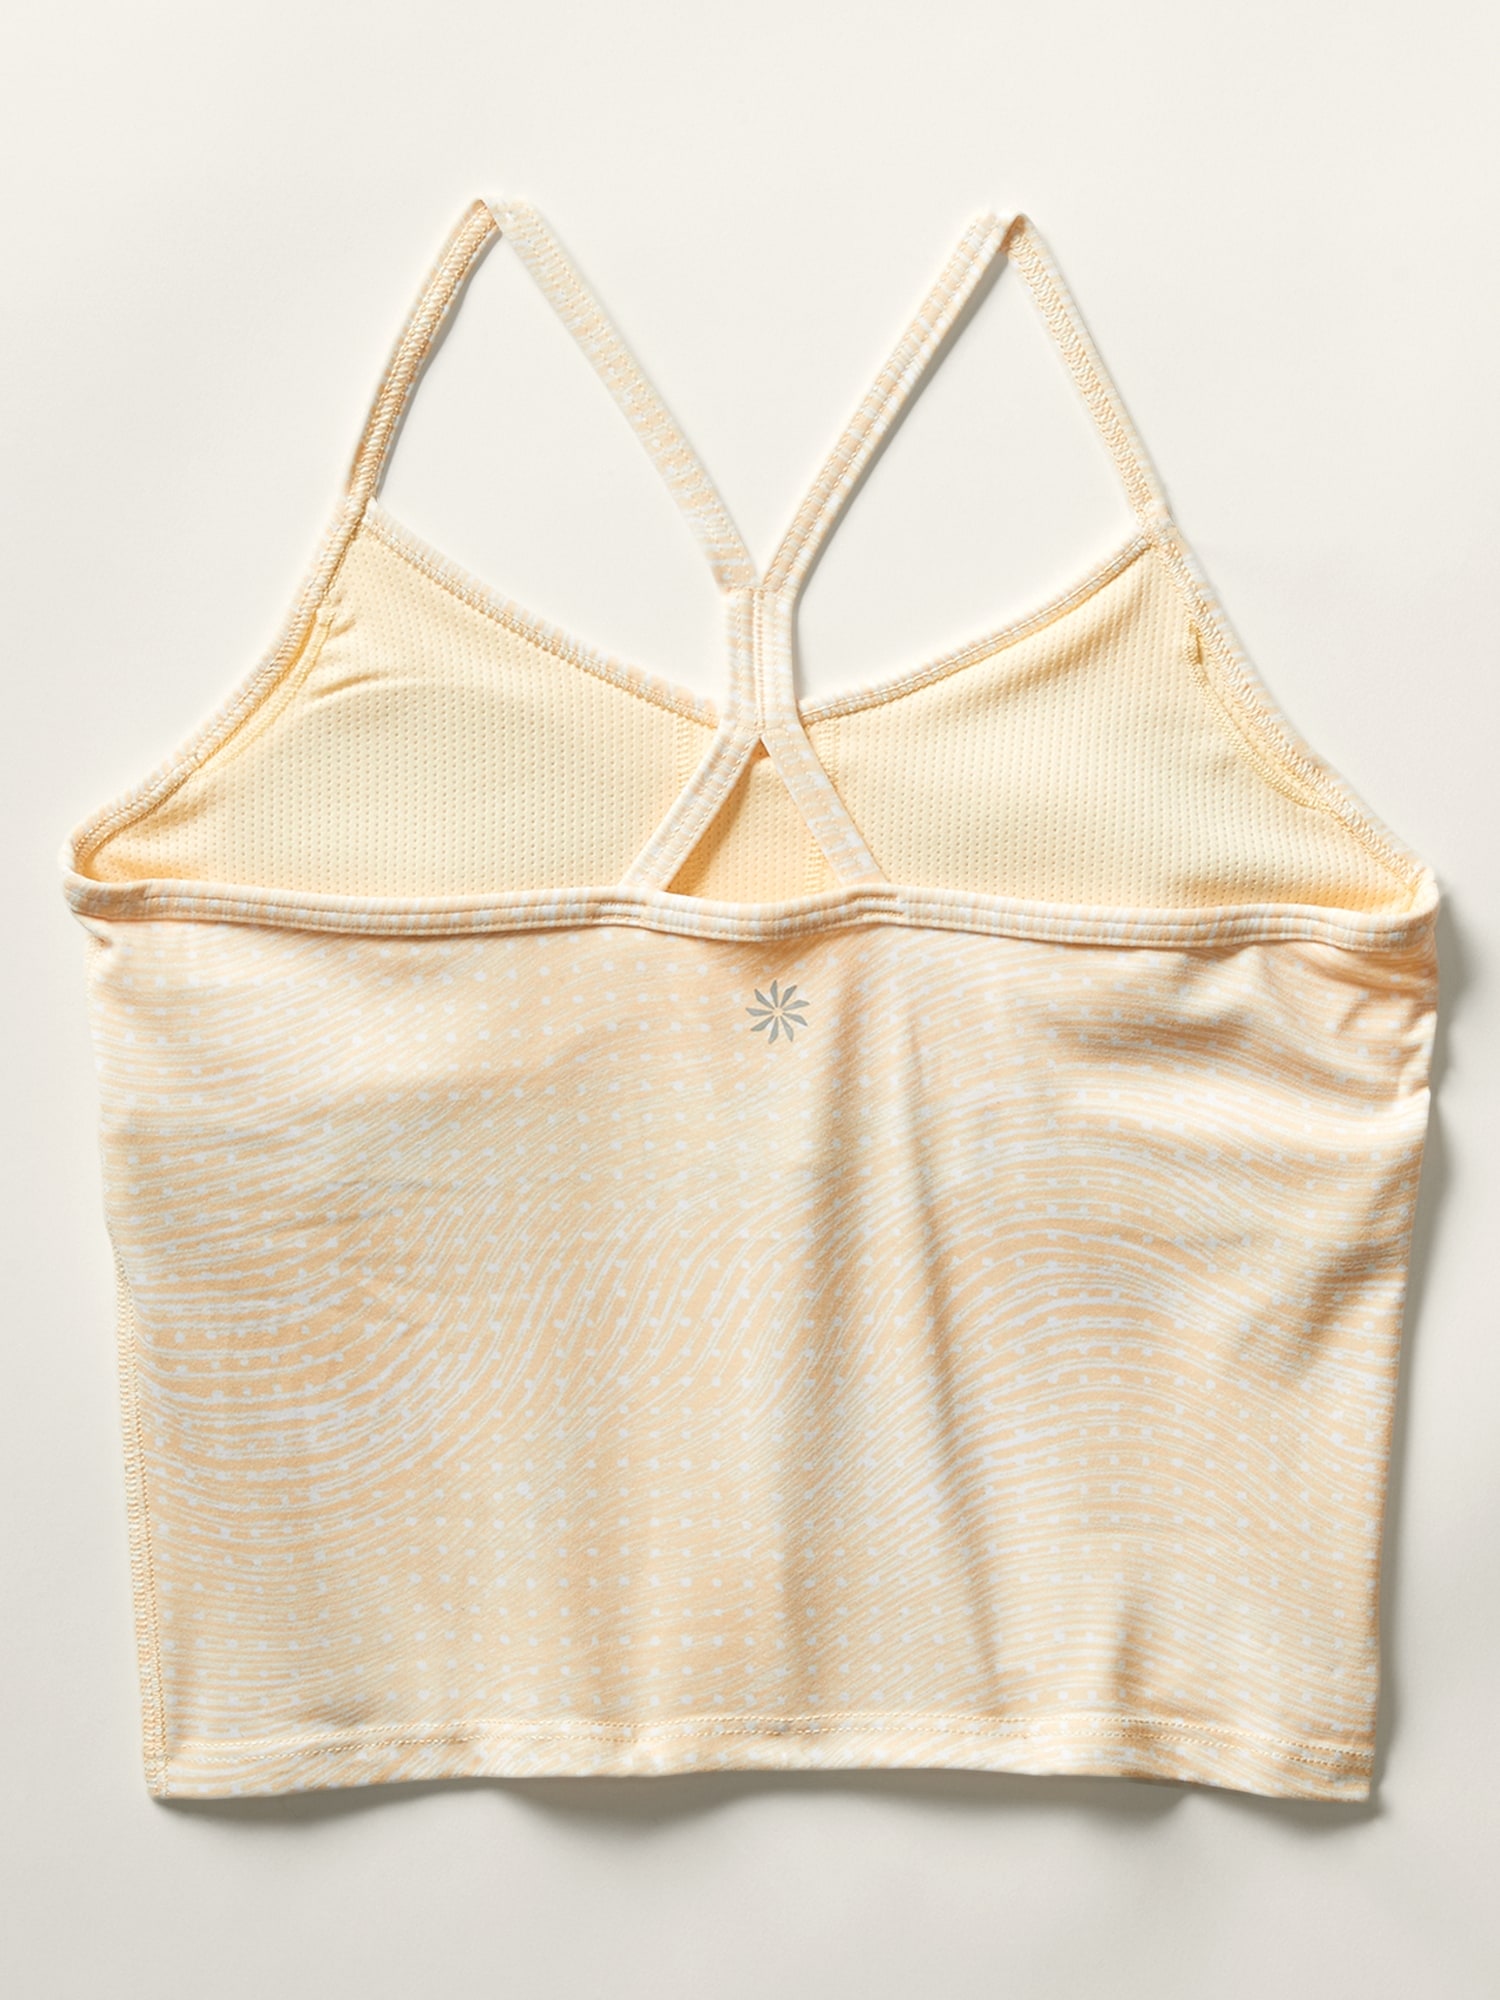 Aeropostale Intimates2 Pack Seamless Bras With Removable Pads Size L